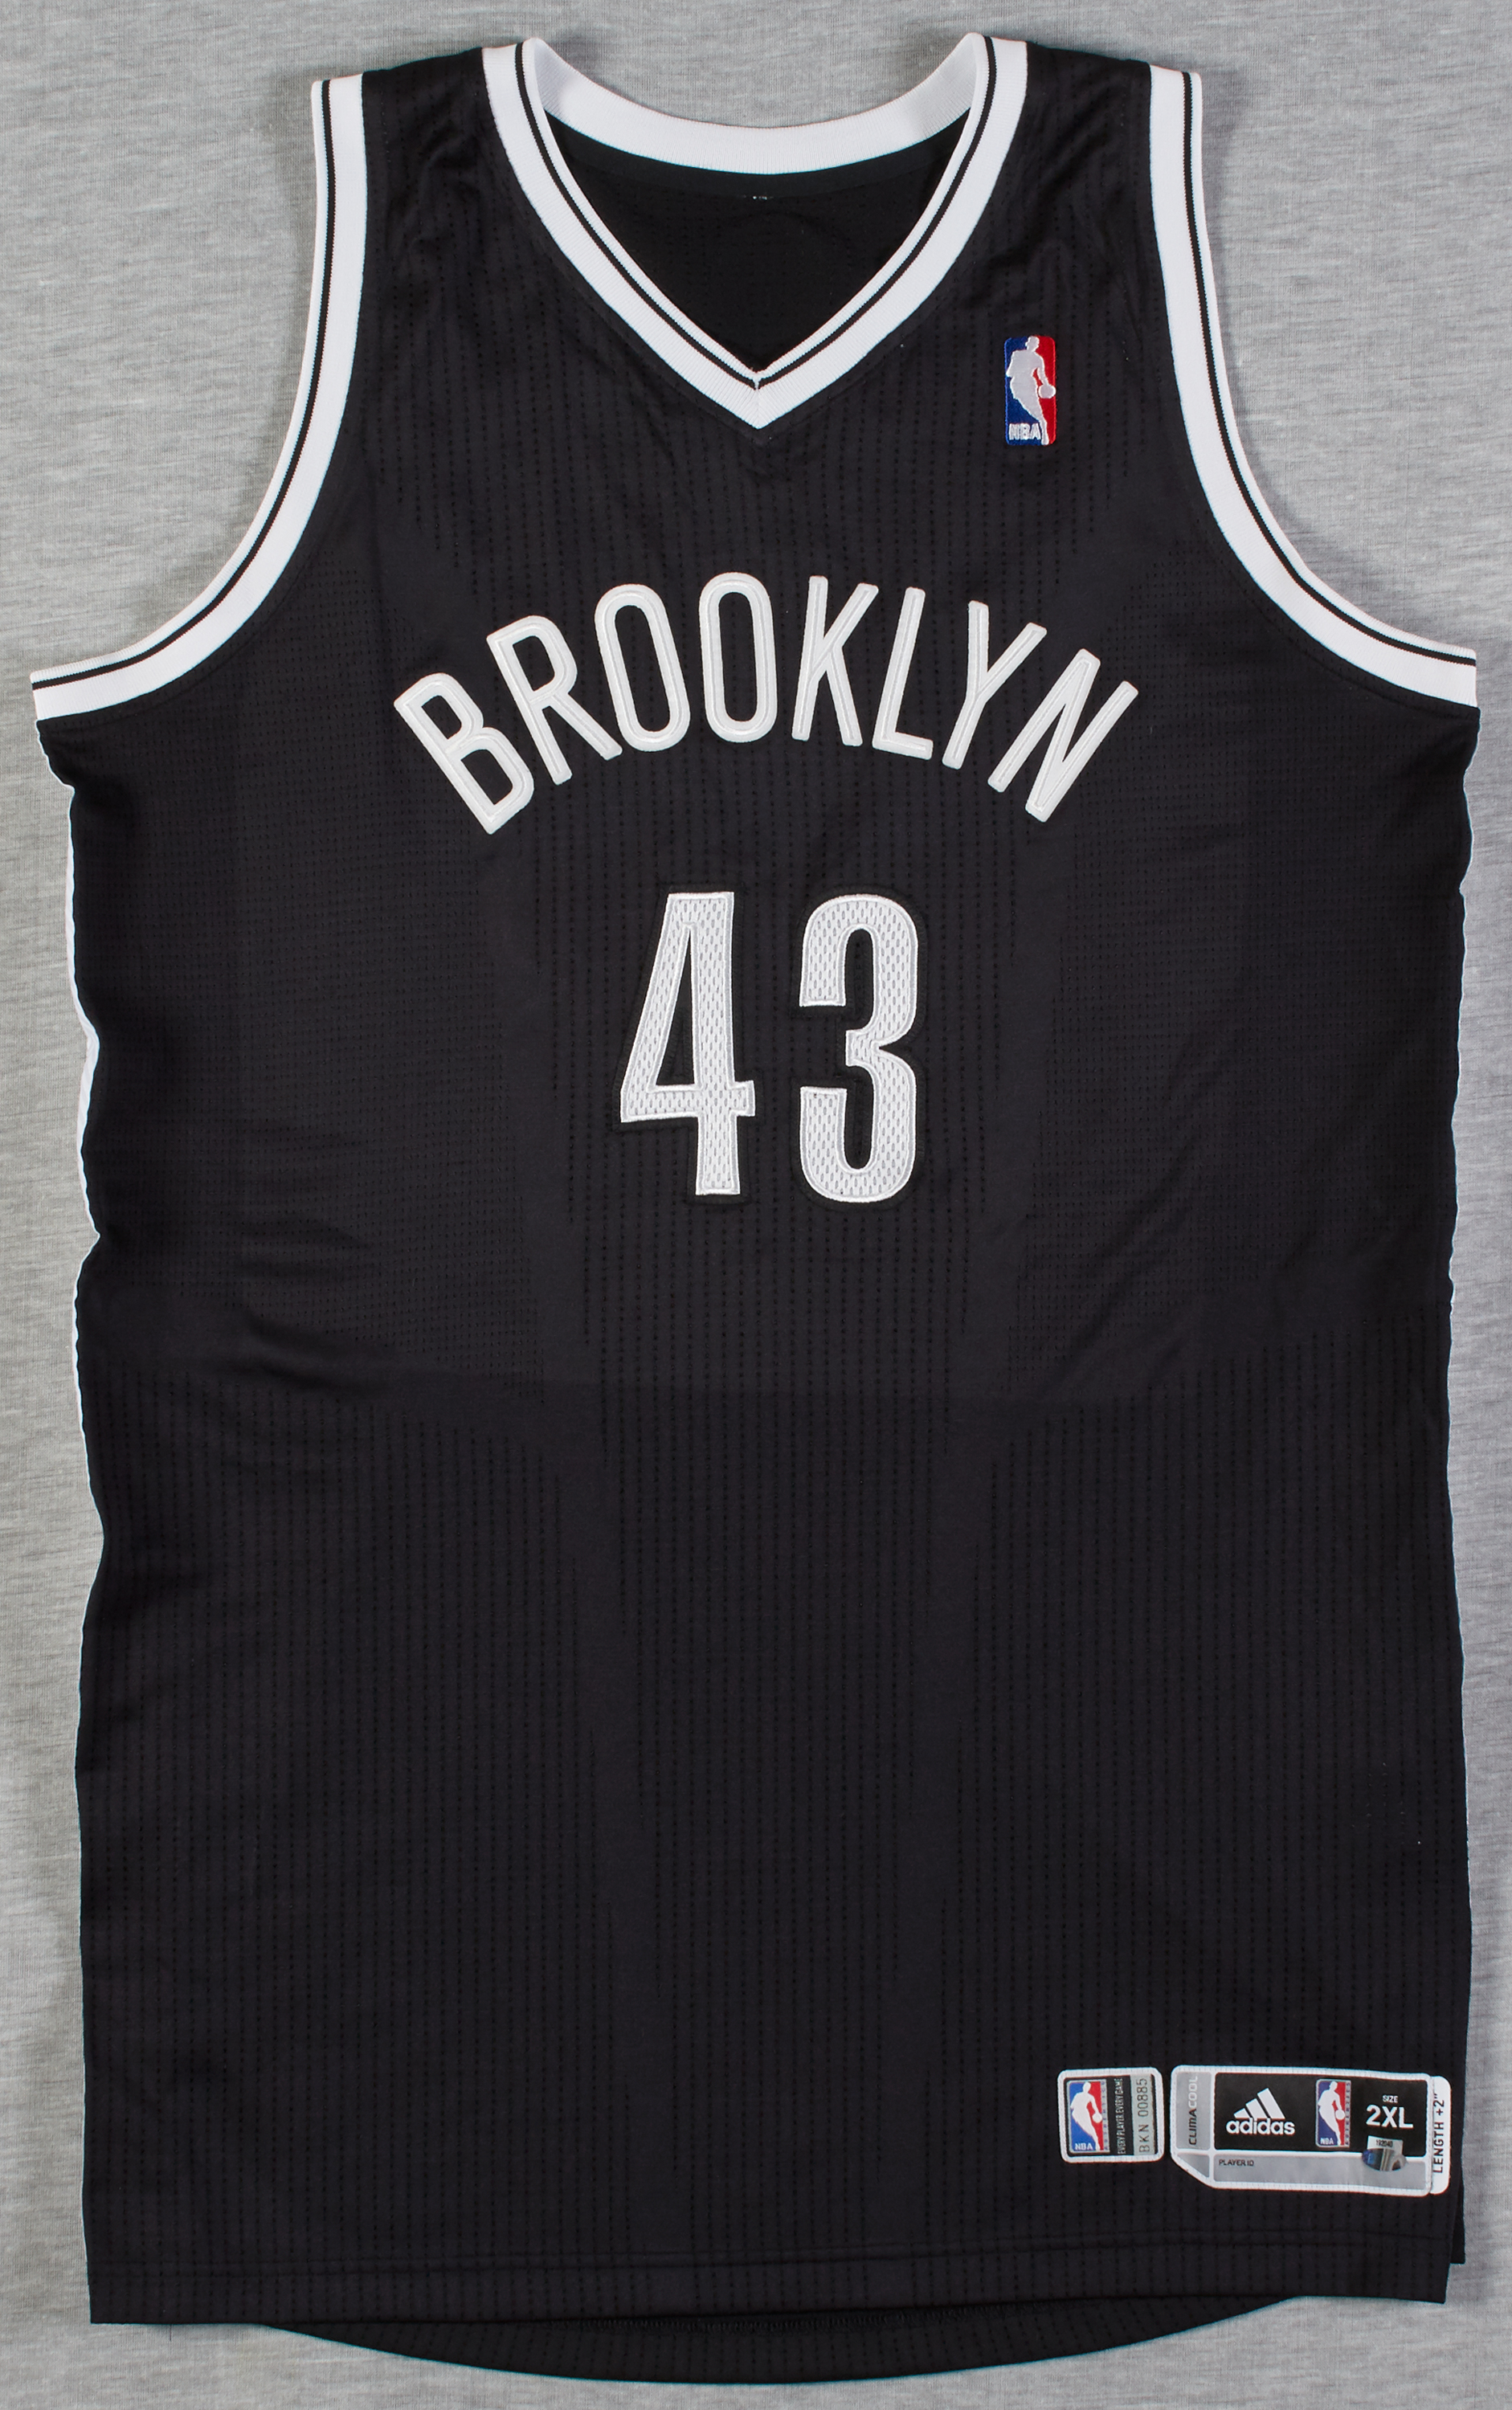 Kris Humphries 2012-13 Game-Used Nets 